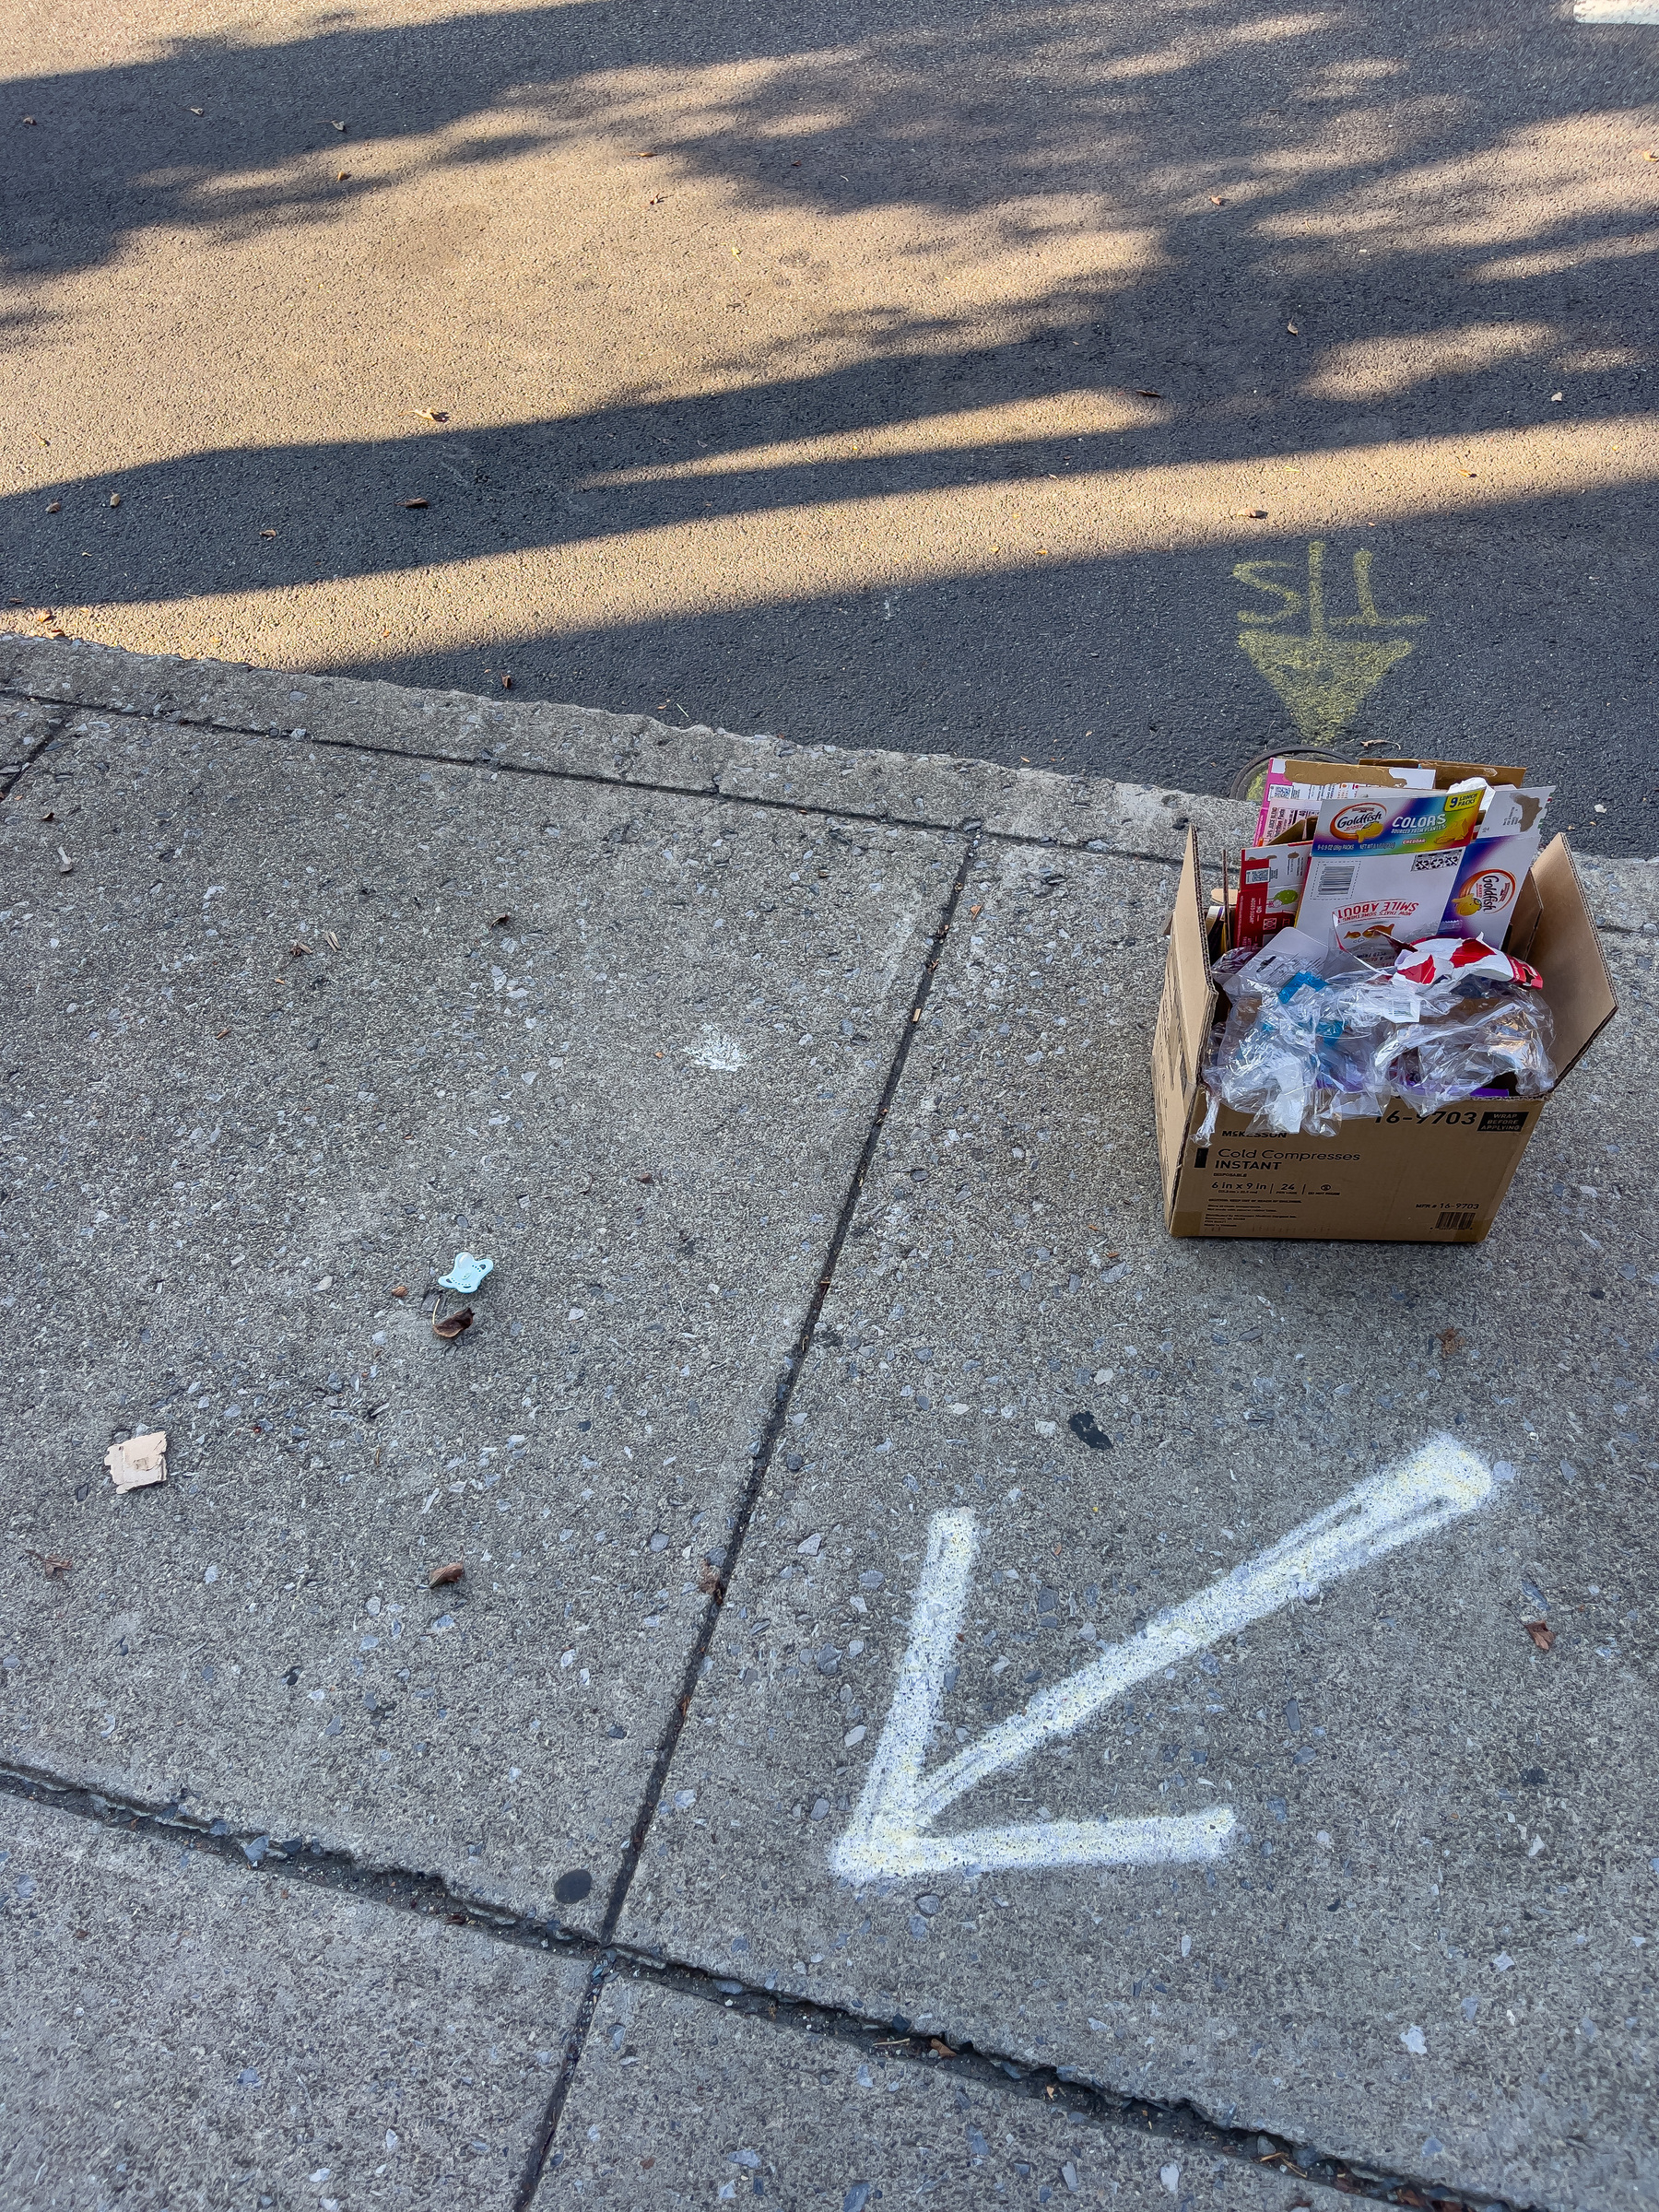 Box full of detritus, painted arrows and detritus scattered on the concrete pavement.